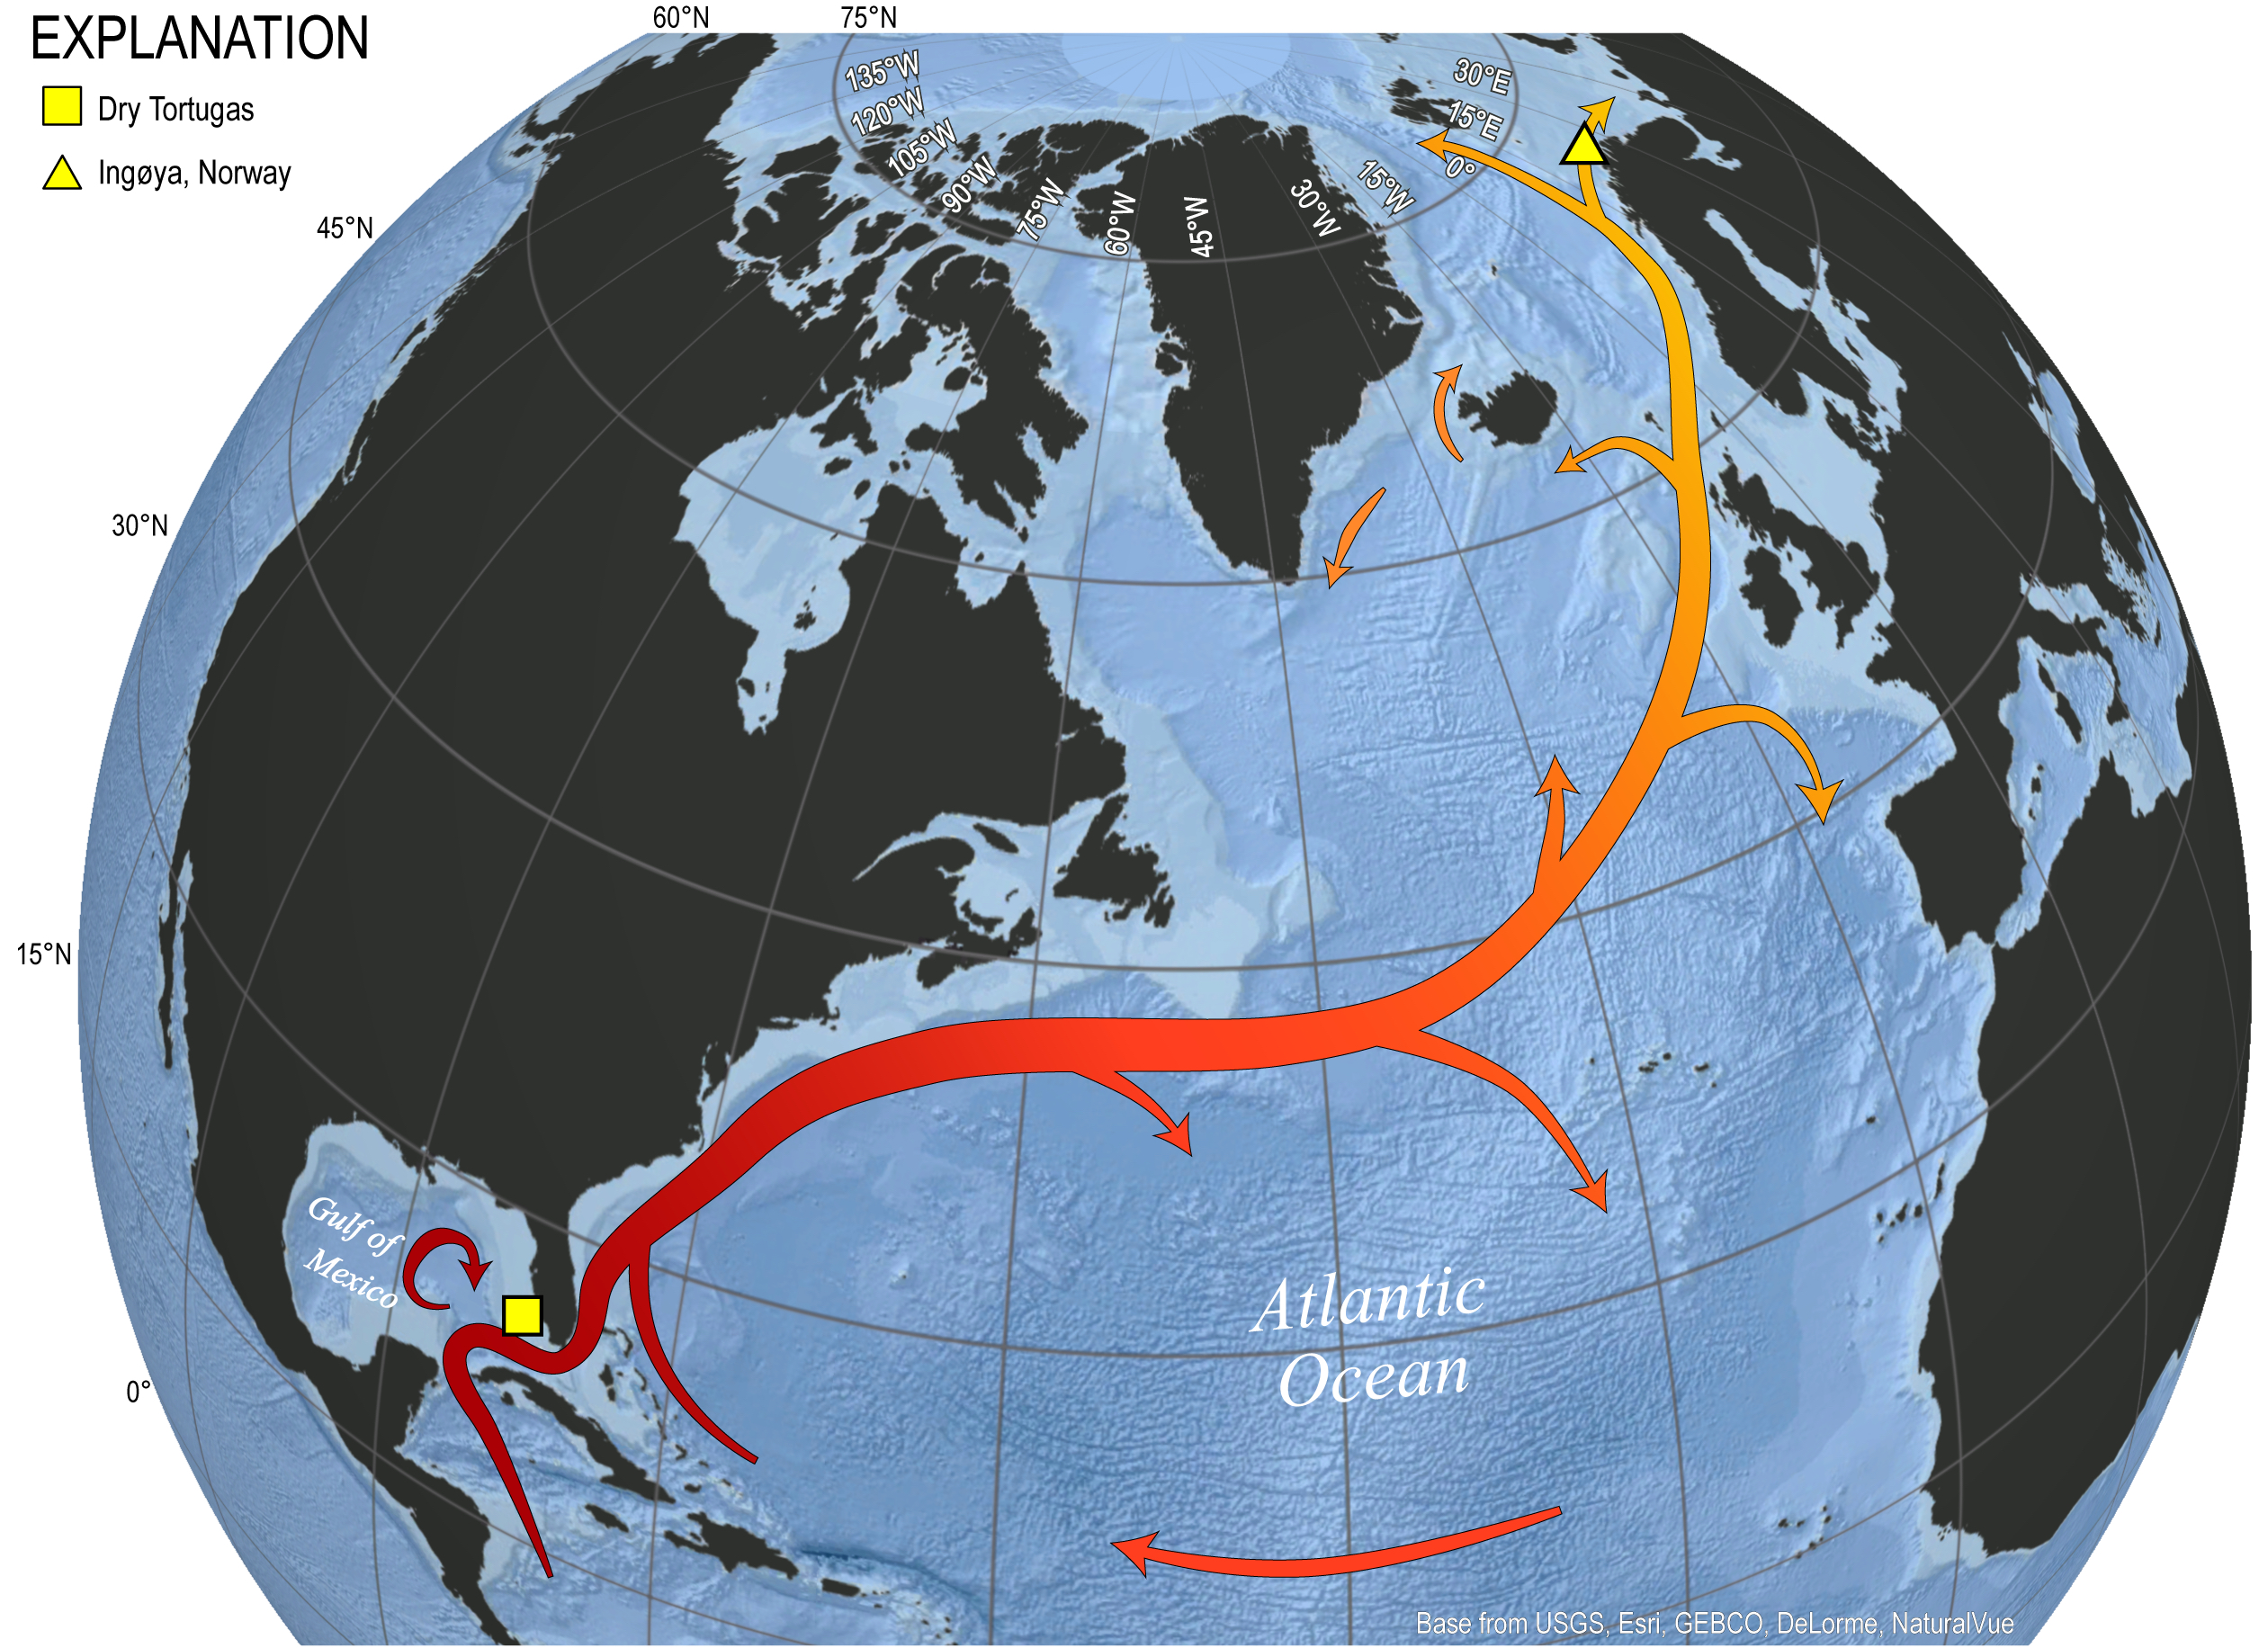 A map showing the location of the atlantic and pacific oceans.